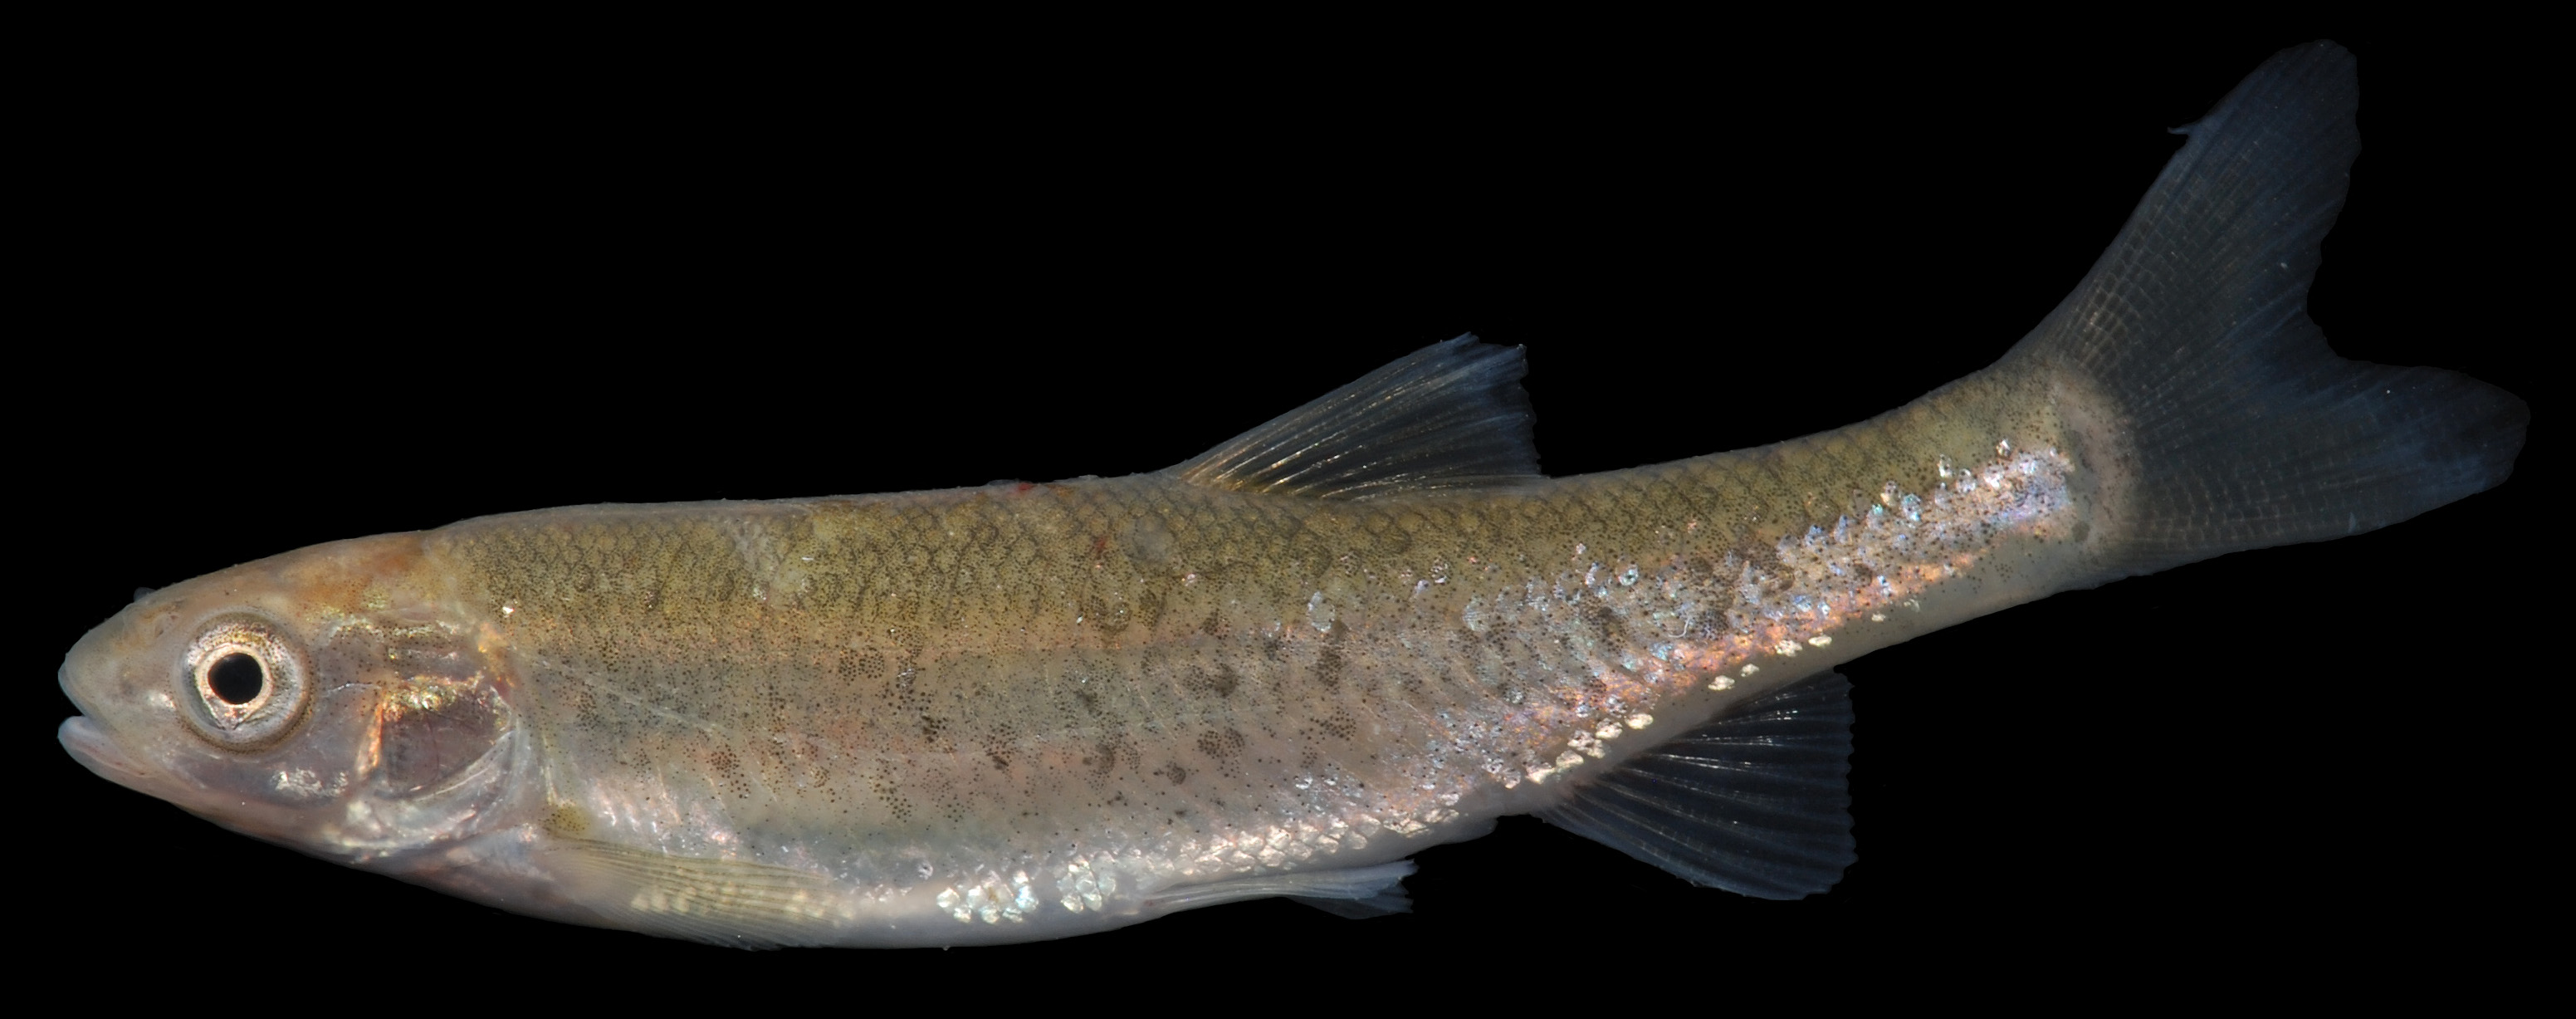 image of Margariscus margarita (Allegheny pearl dace)